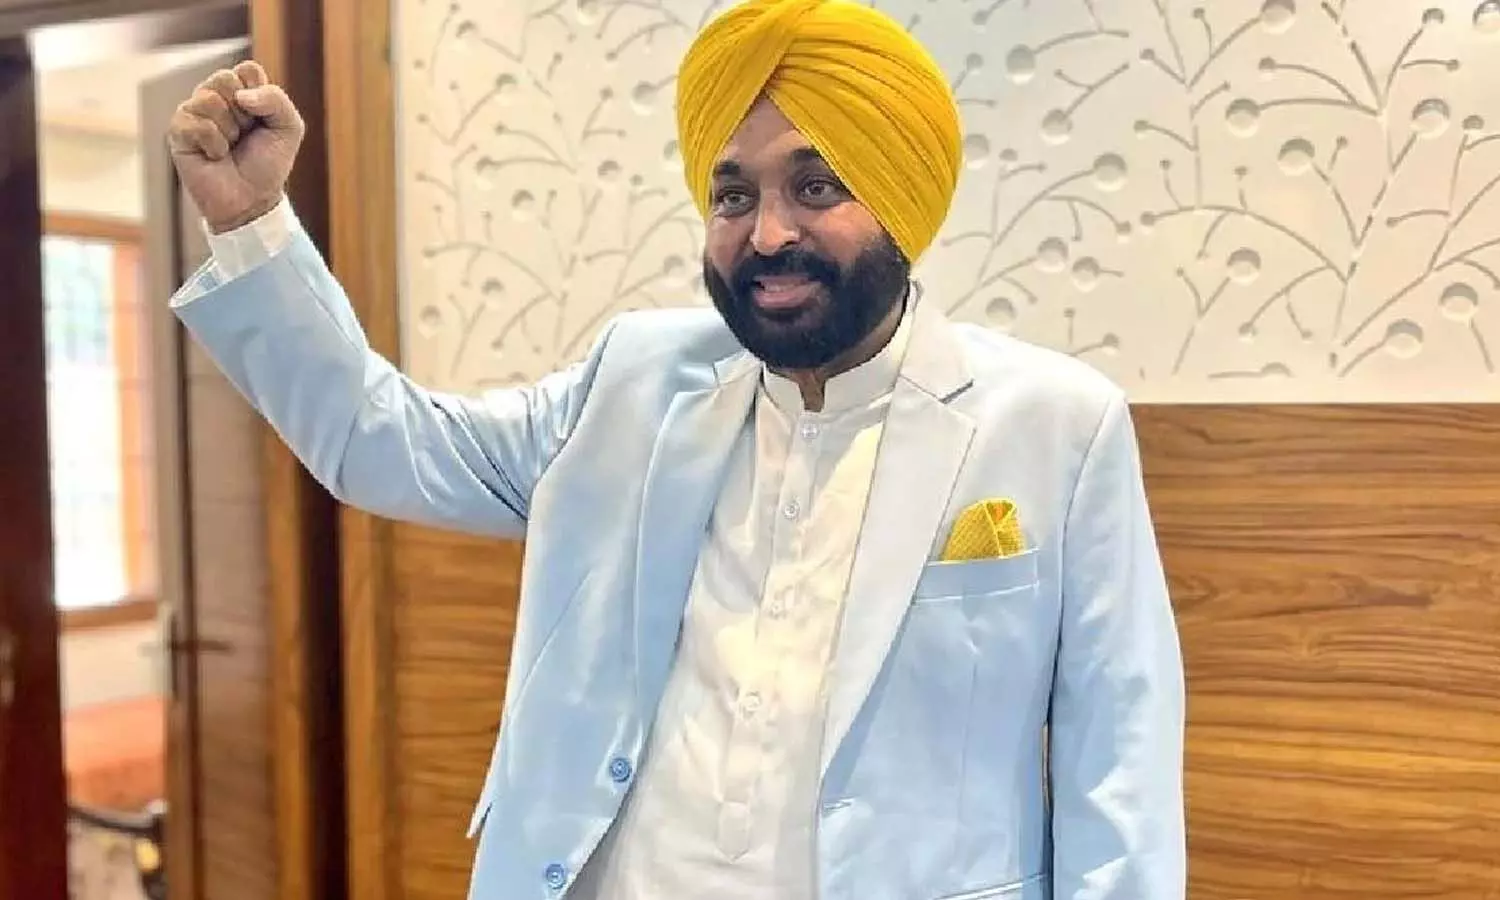 Punjab CM Bhagwant Mann will marry Dr. Gurpreet Kaur tomorrow, some special people including Arvind Kejriwal will be present